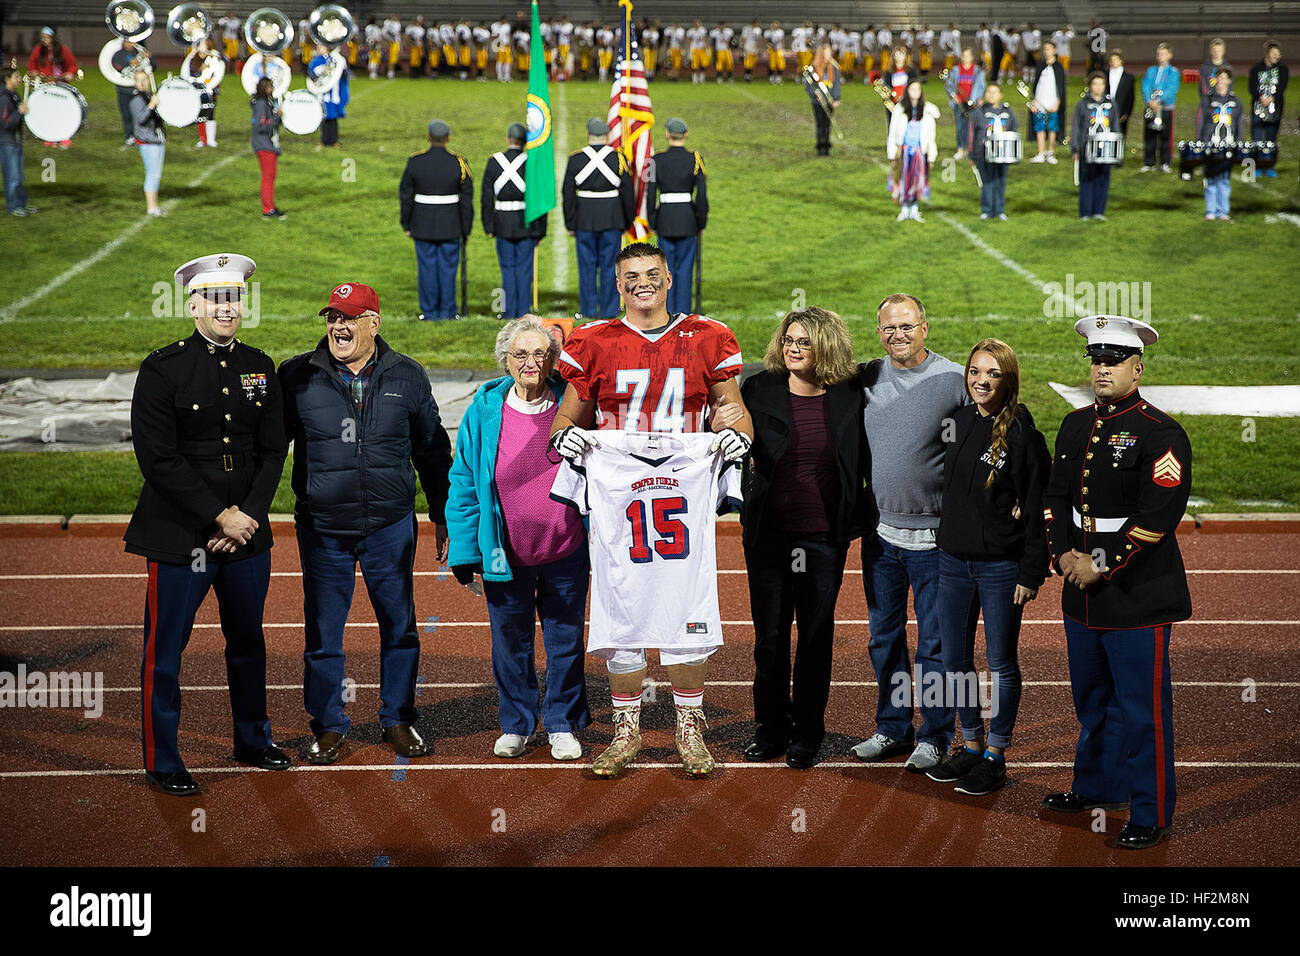 Shane Lemieux (center), a offensive tackle for the West Valley High School Rams varsity football team and 17-year-old native of Yakima, Wash., stands among his family members after receiving his 2015 Semper Fidelis All-American Bowl jersey from Capt. Ryan Sahlberg (left), the operations officer of Marine Corps Recruiting Station Seattle, and Sgt. James Campos, a local Marine recruiter, at a game against the Wenatchee High School Panthers at West Valley High School in Yakima, Wash., Oct. 31, 2014. Lemieux, a University of Oregon commit, is among approximately 100 student athletes from across th Stock Photo